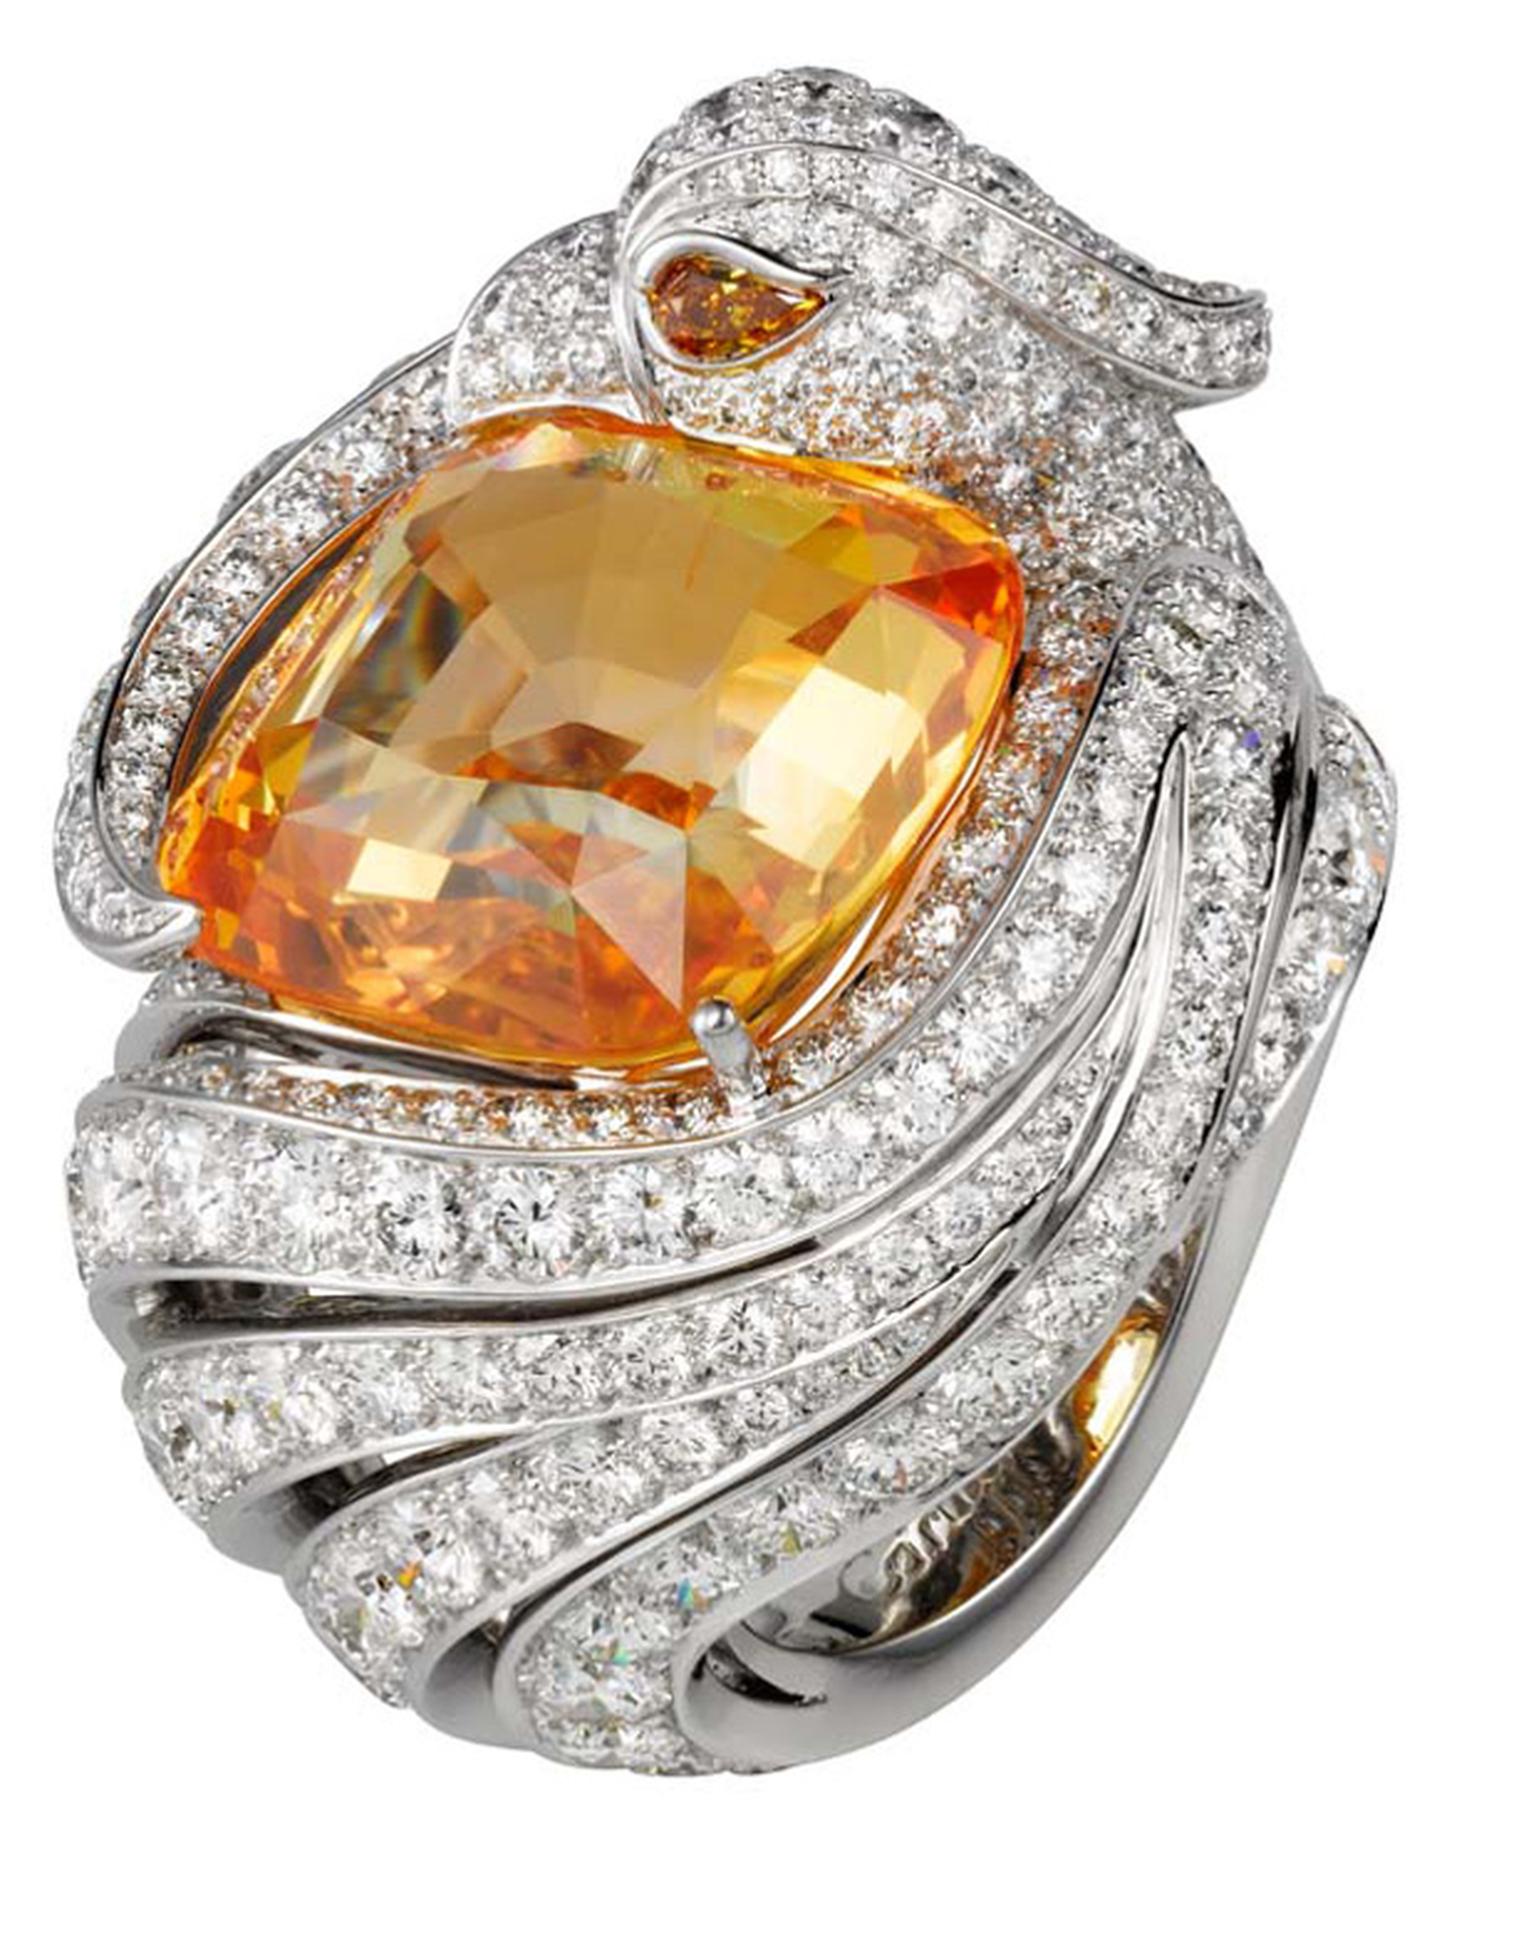 Cartier Bird Ring with diamons and yellow sapphire